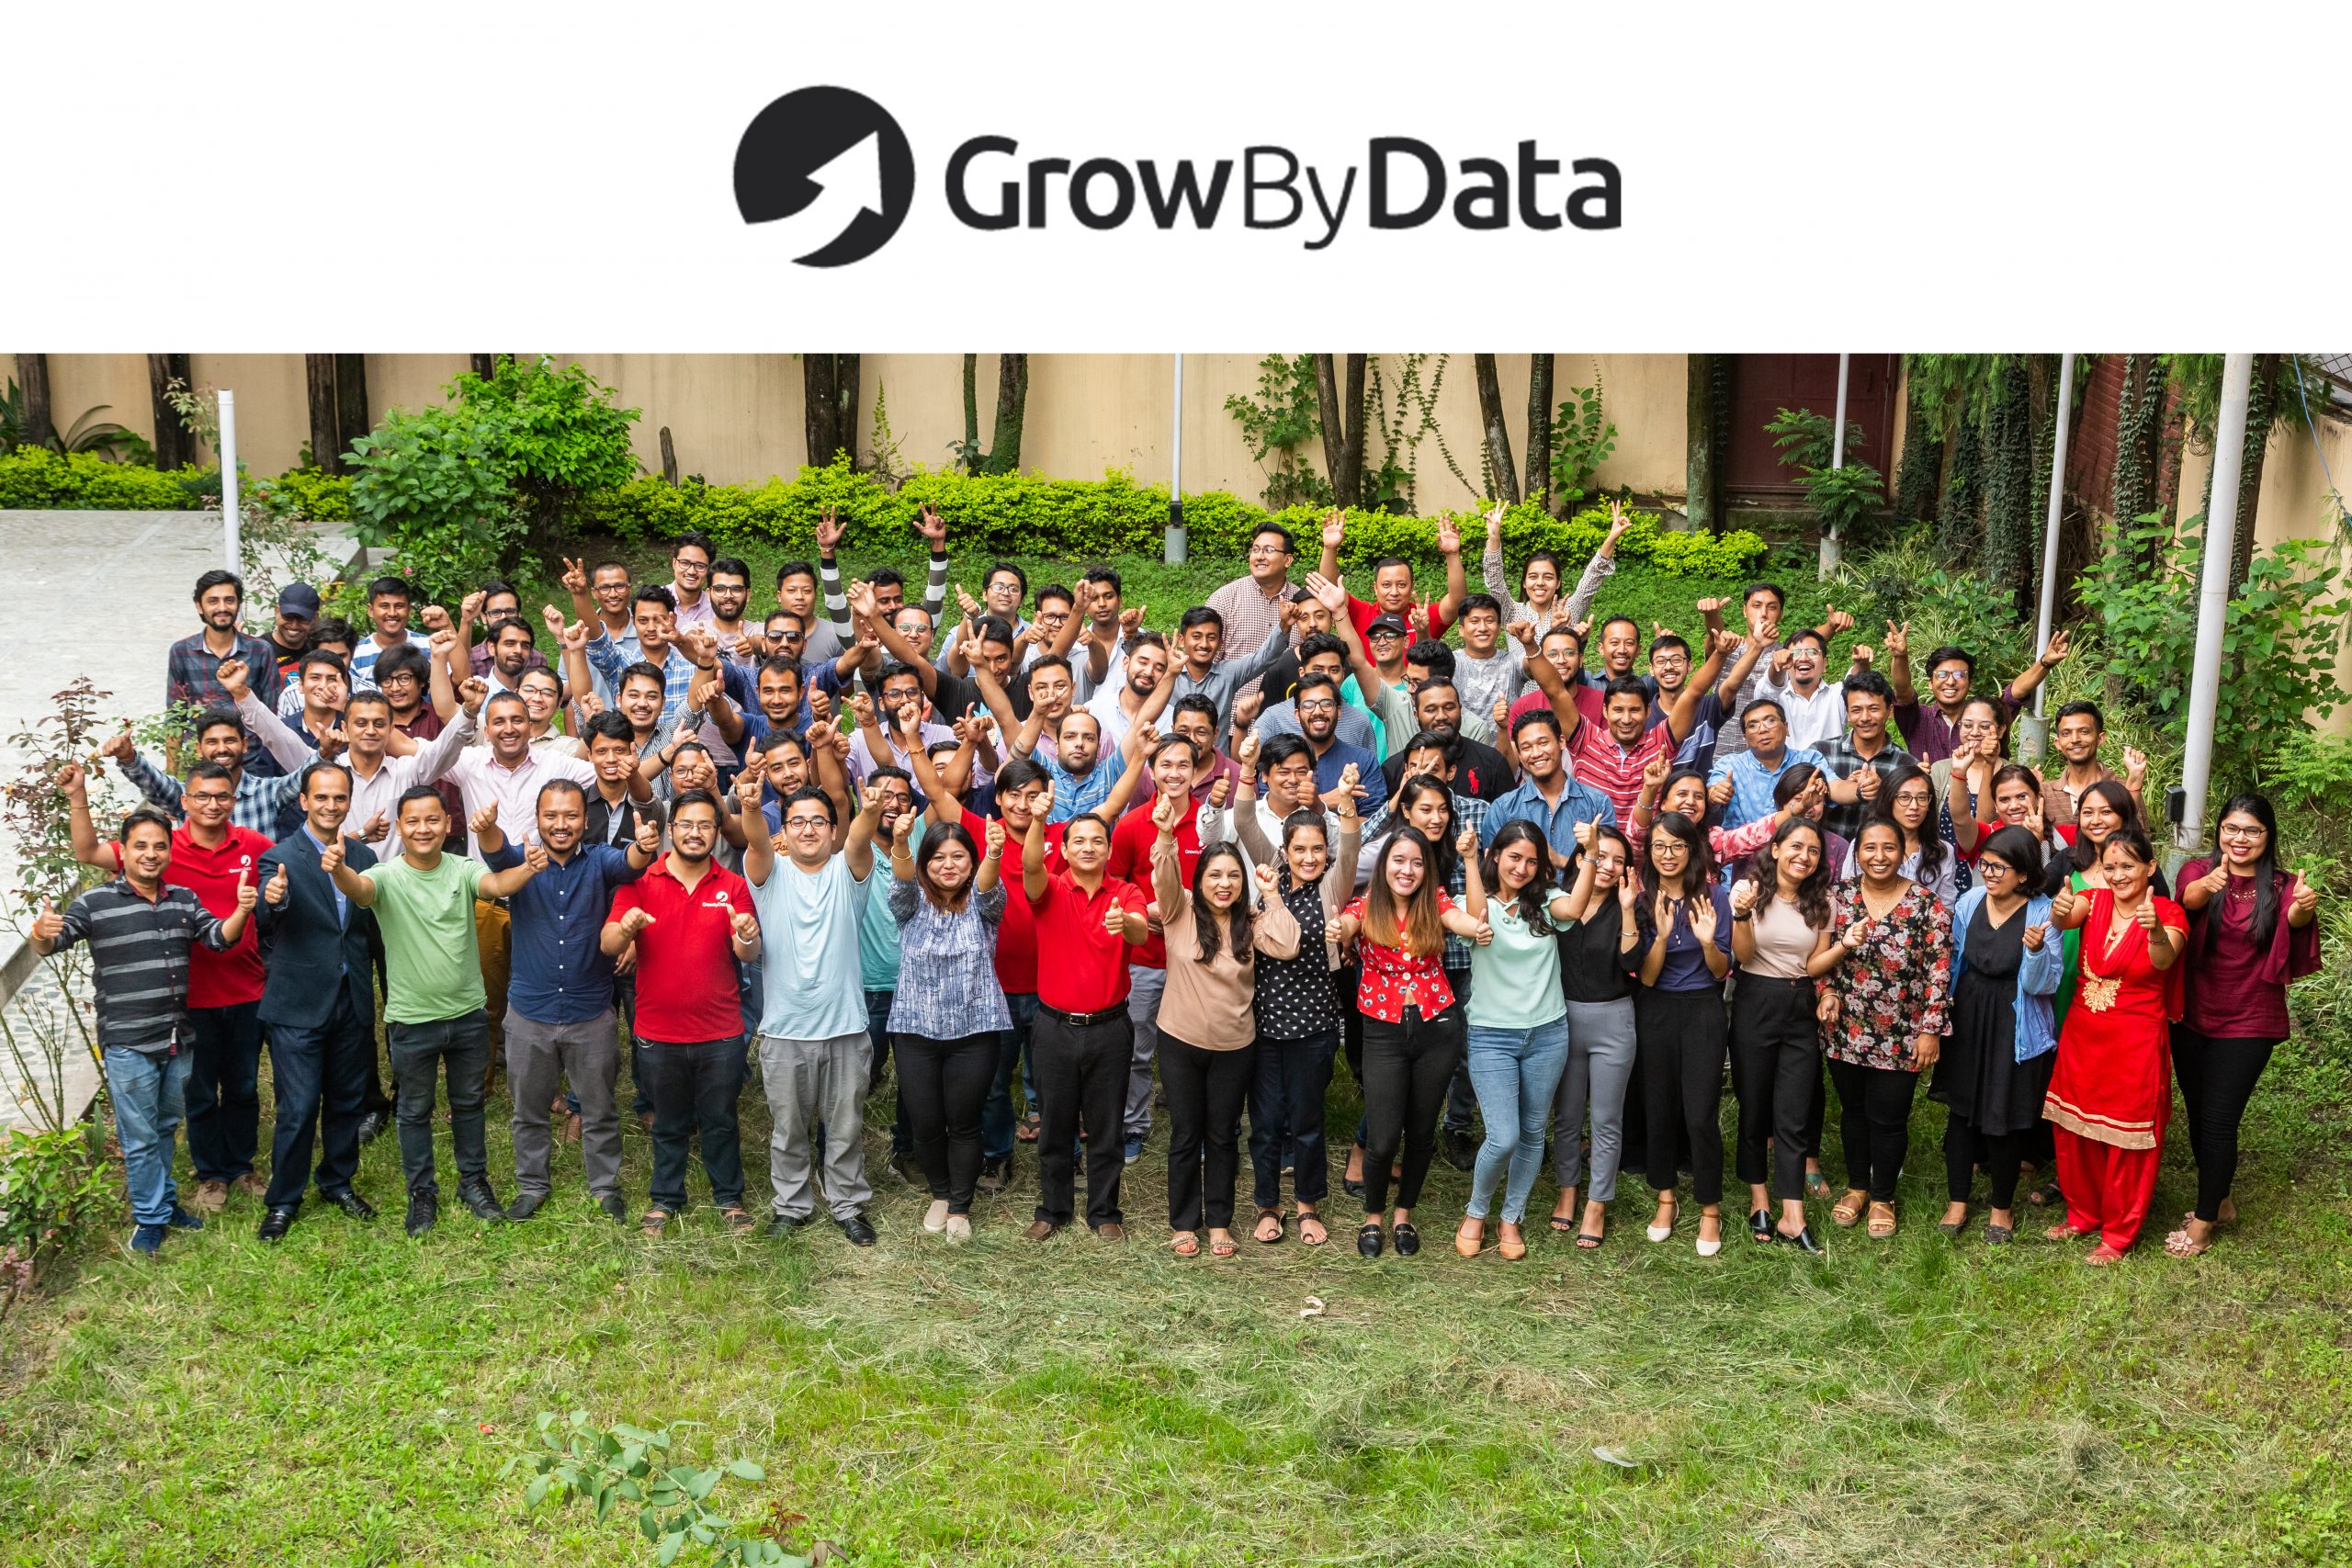 Image: Boston Based, GrowByData, are shortlisted for the US Search Awards